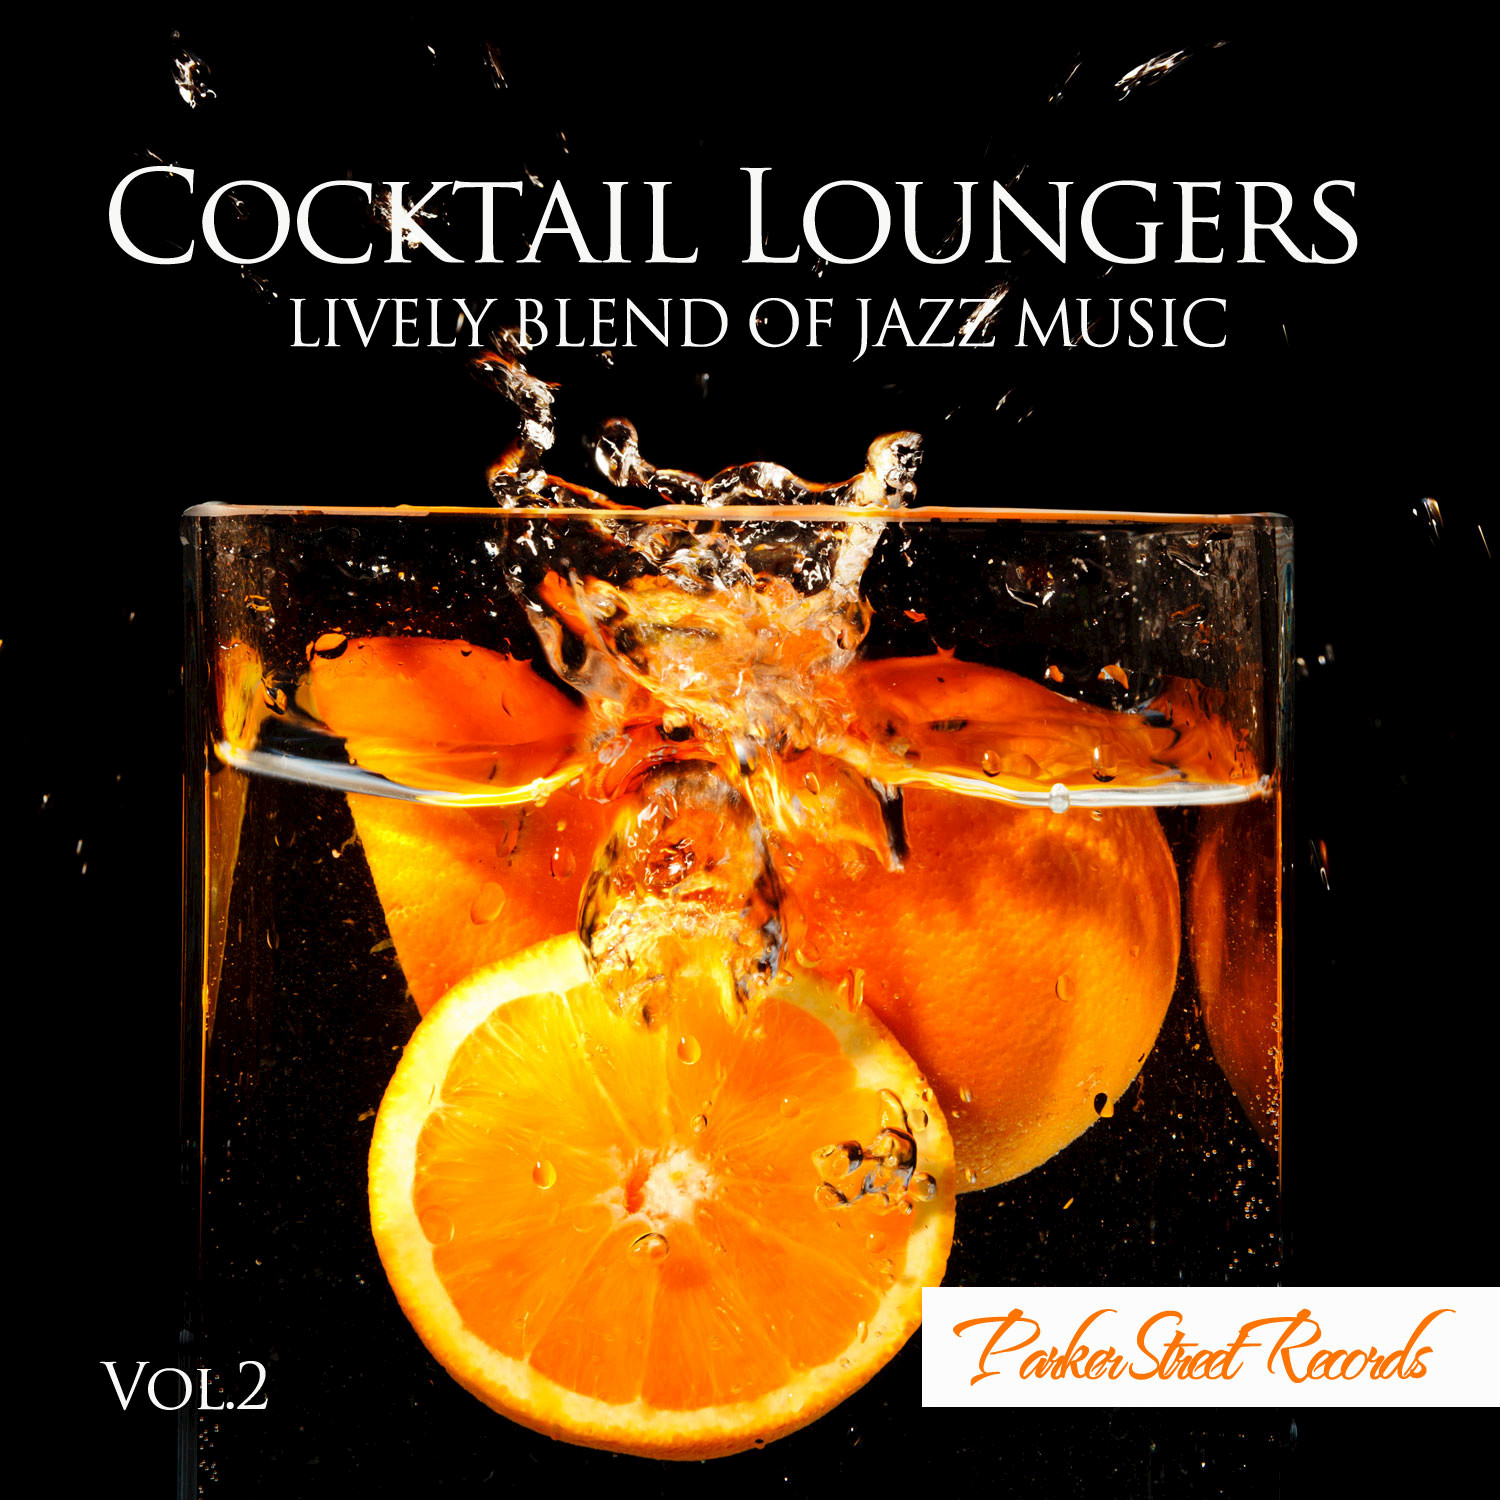 Cocktail Loungers Vol. 2